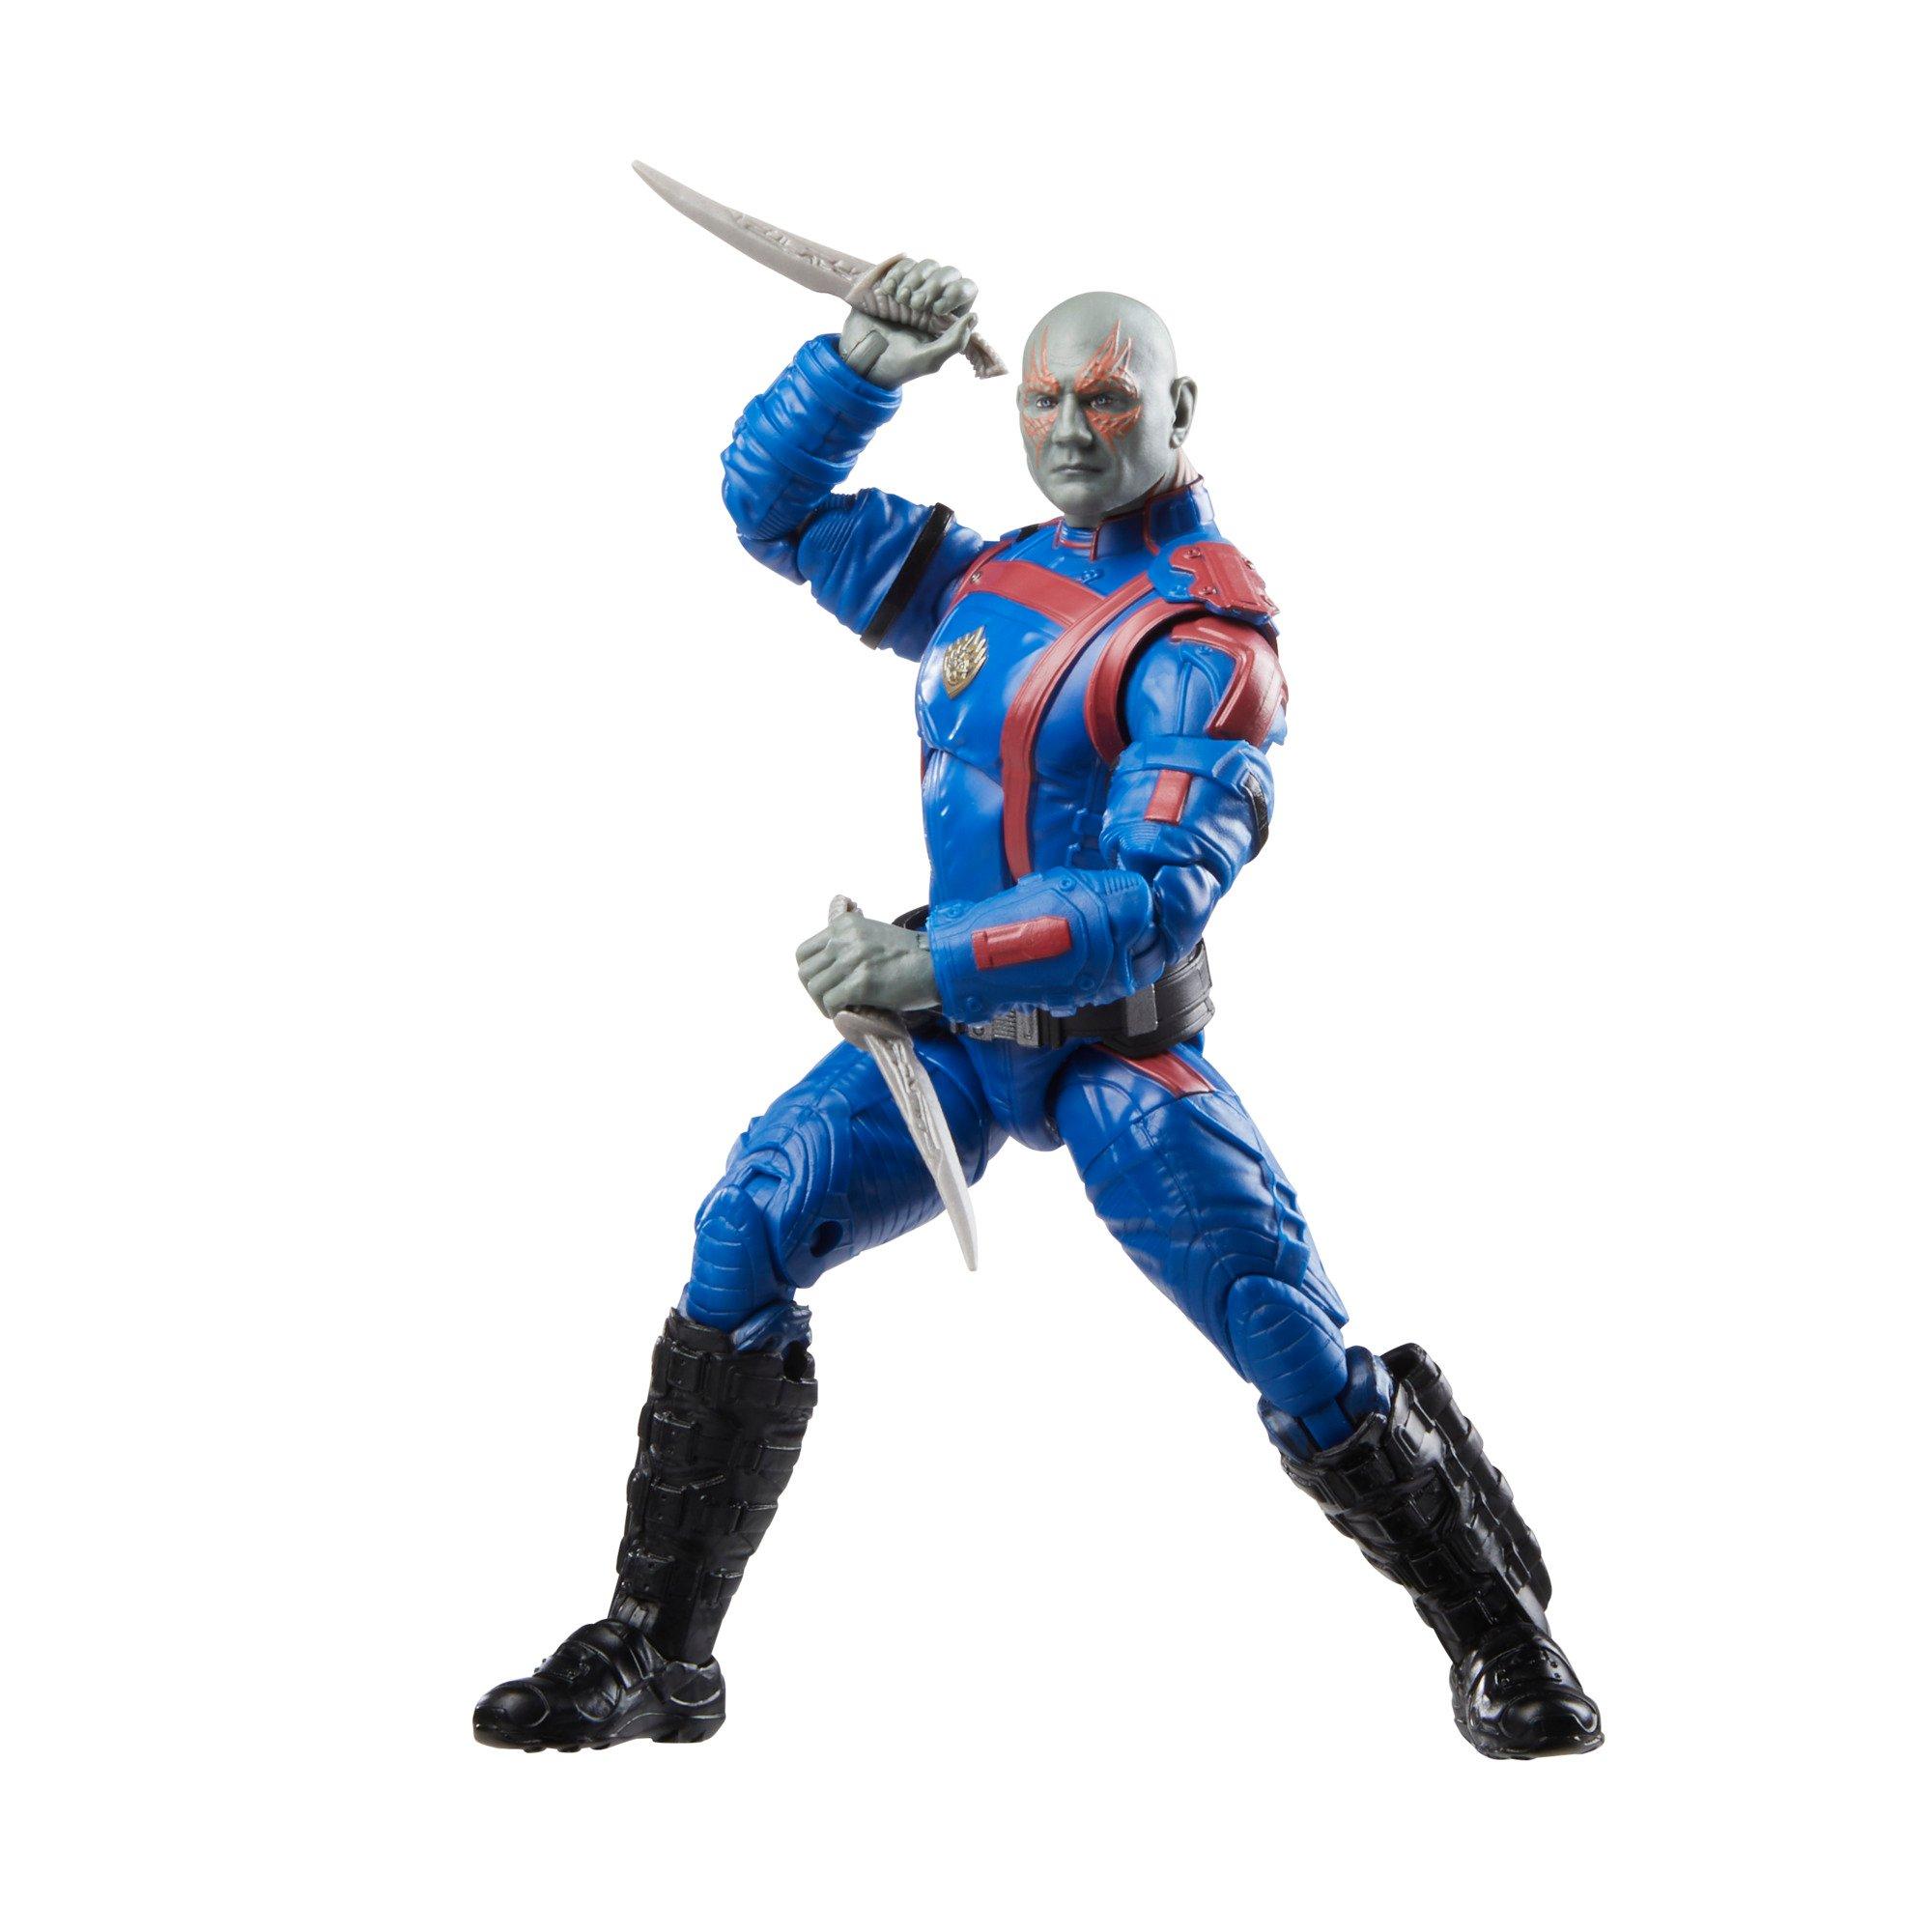  Marvel Legends Guardians of the Galaxy Vol. 2 Marvel's